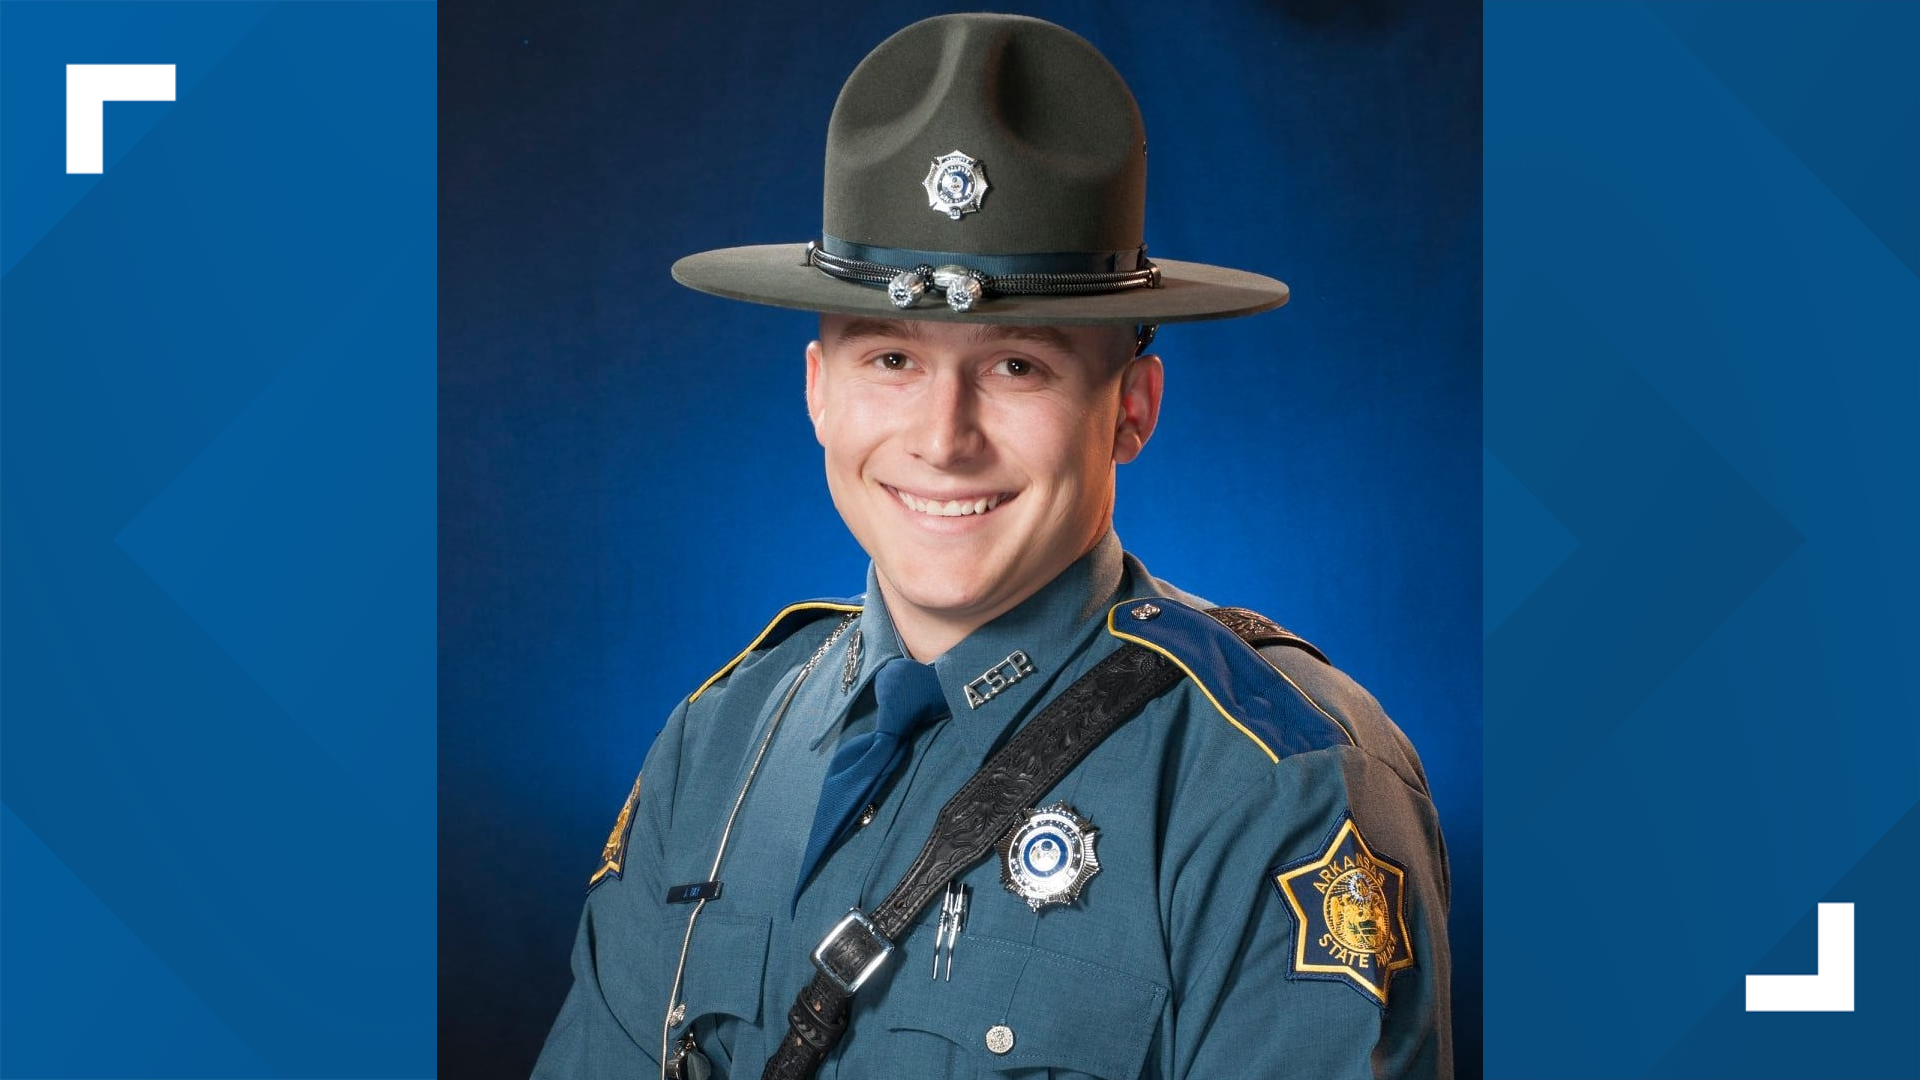 Arkansas State trooper named National Trooper of the Year